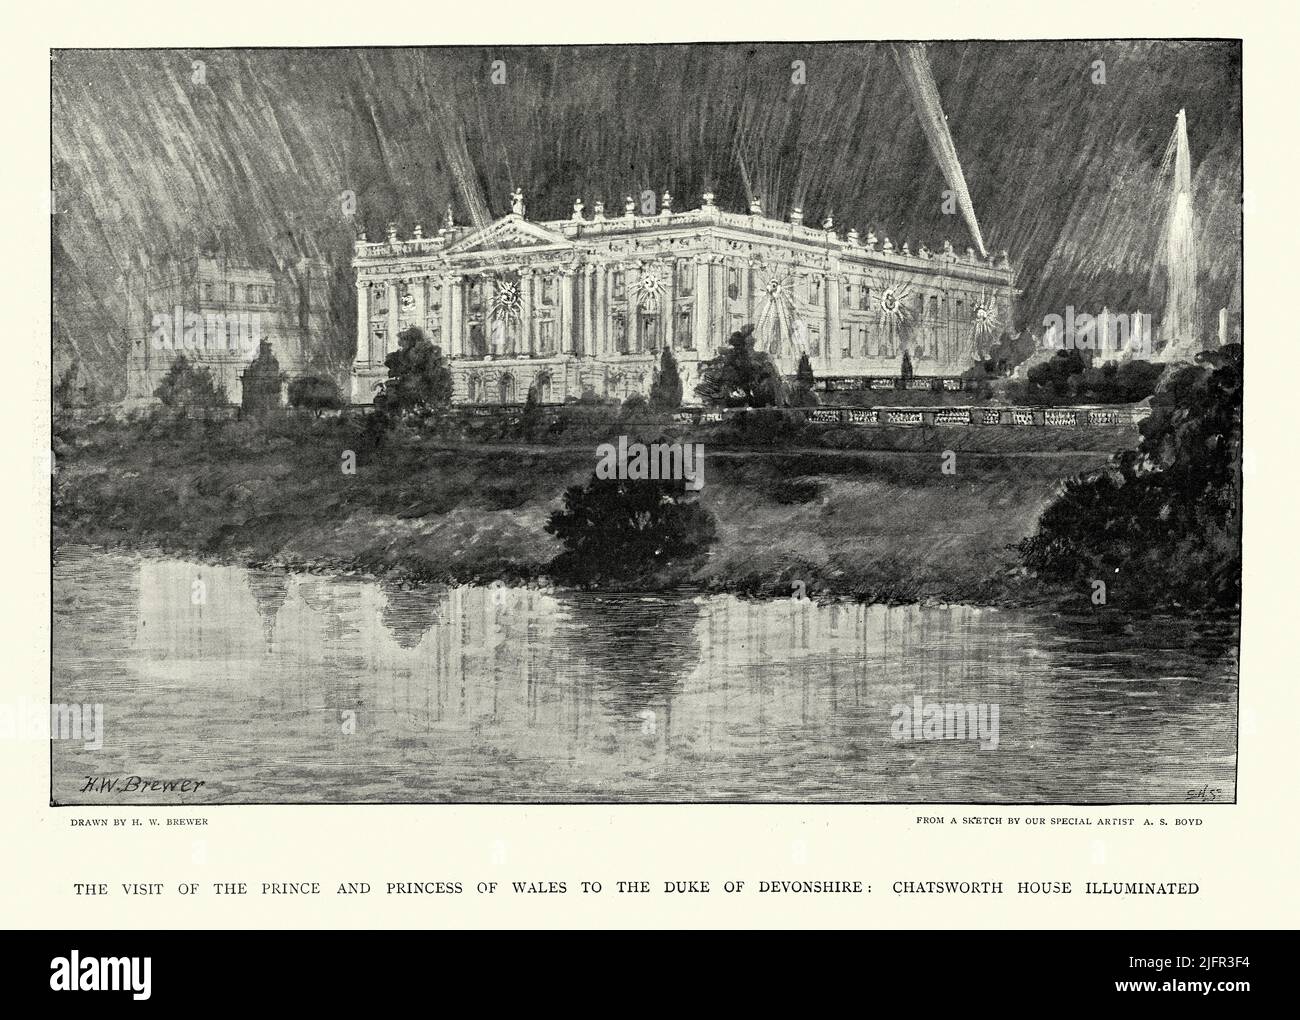 Vintage illustration Chatsworth House illuminated for the visit of the Prince and Princess of Wales in 1898, 19th Century Stock Photo